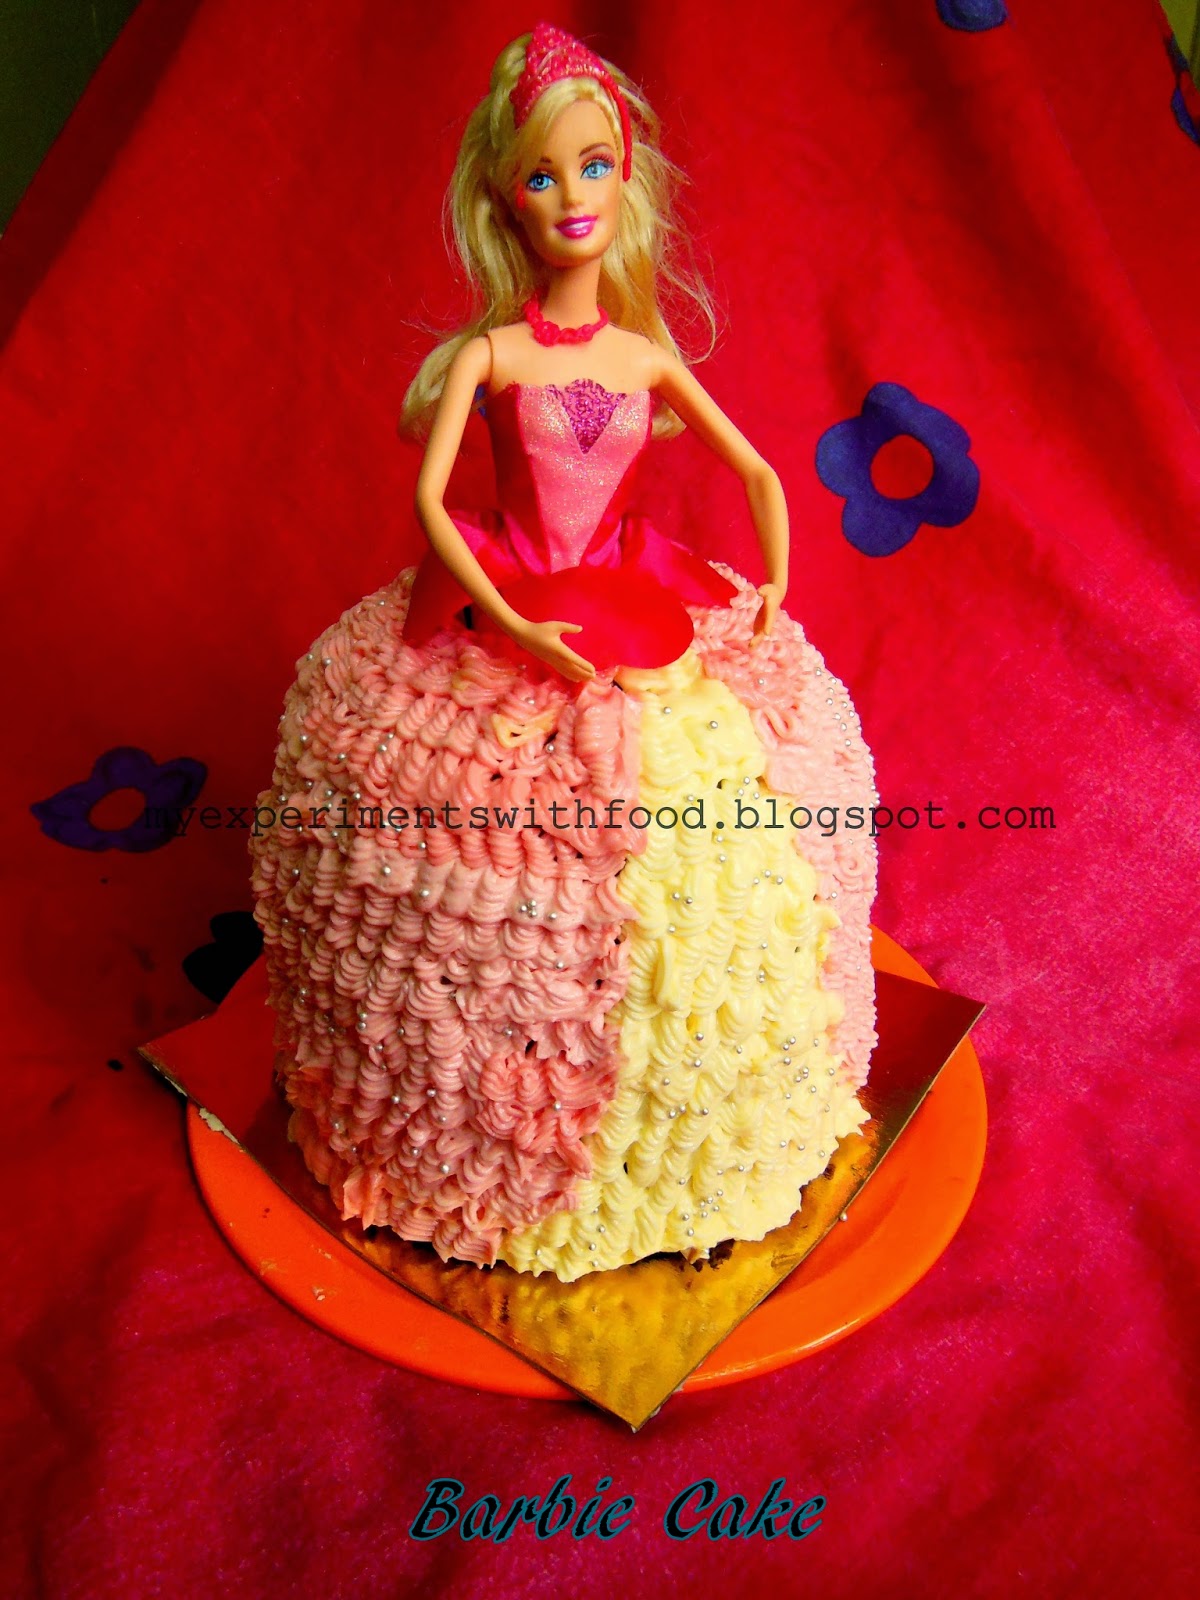 My Experiments With Food: Barbie Cake with Strawberry Buttercream Icing